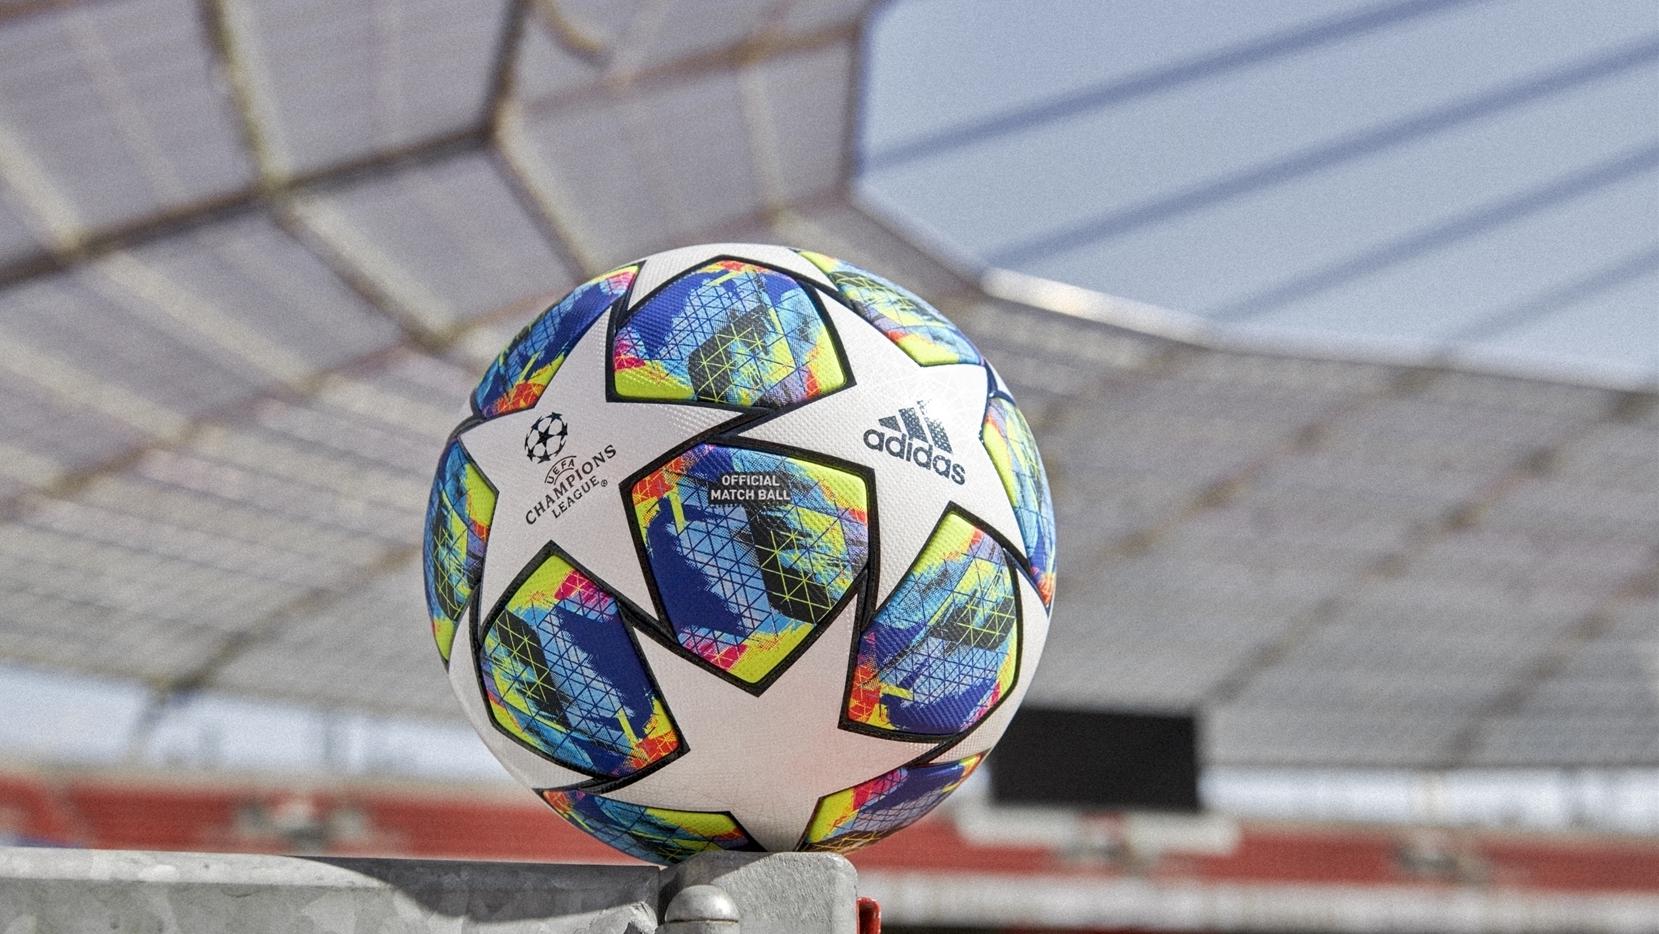 official champions league ball 2019